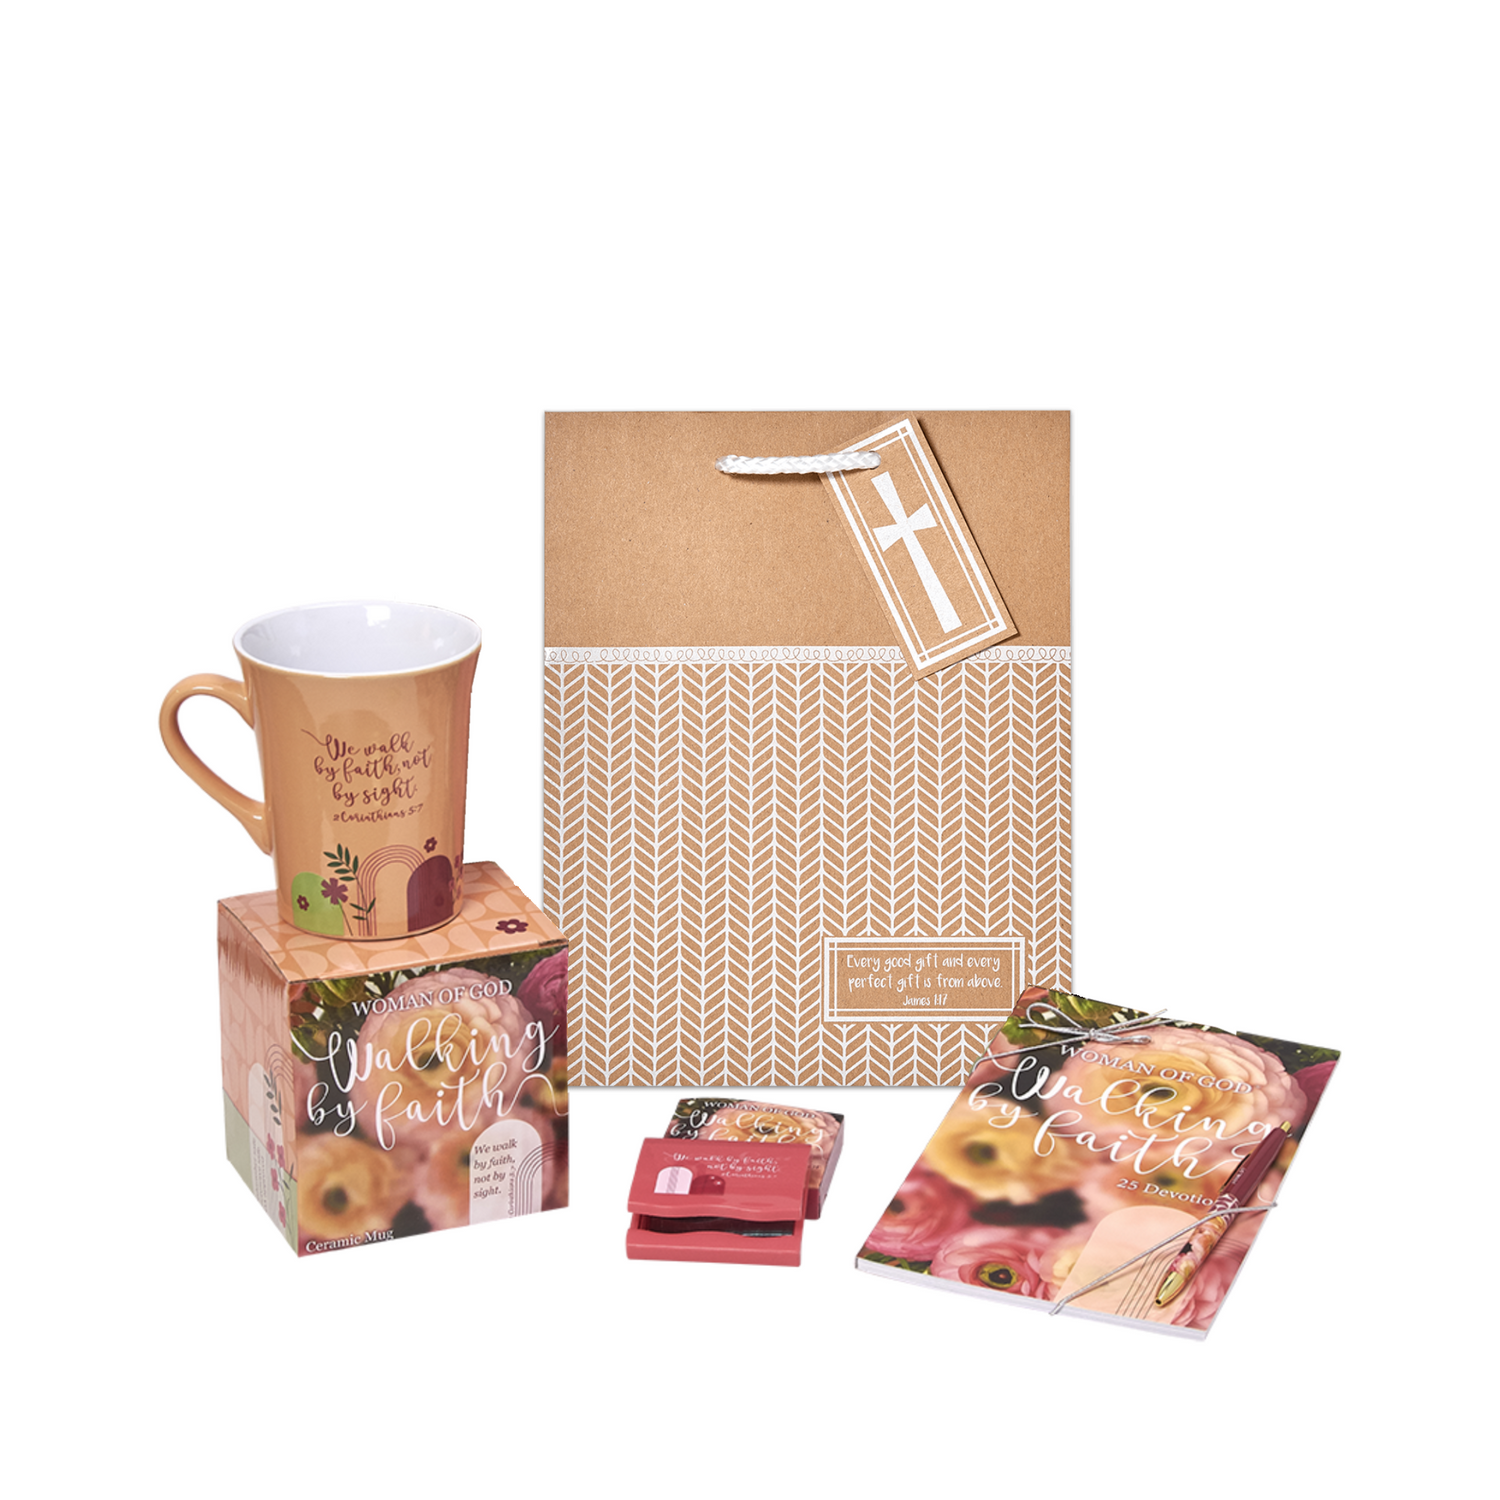 Gift set featuring a Woman of God: Walking by Faith Ceramic Mug & Gift box, Devotion book & Pen set, compact mirror in case, and gift bag